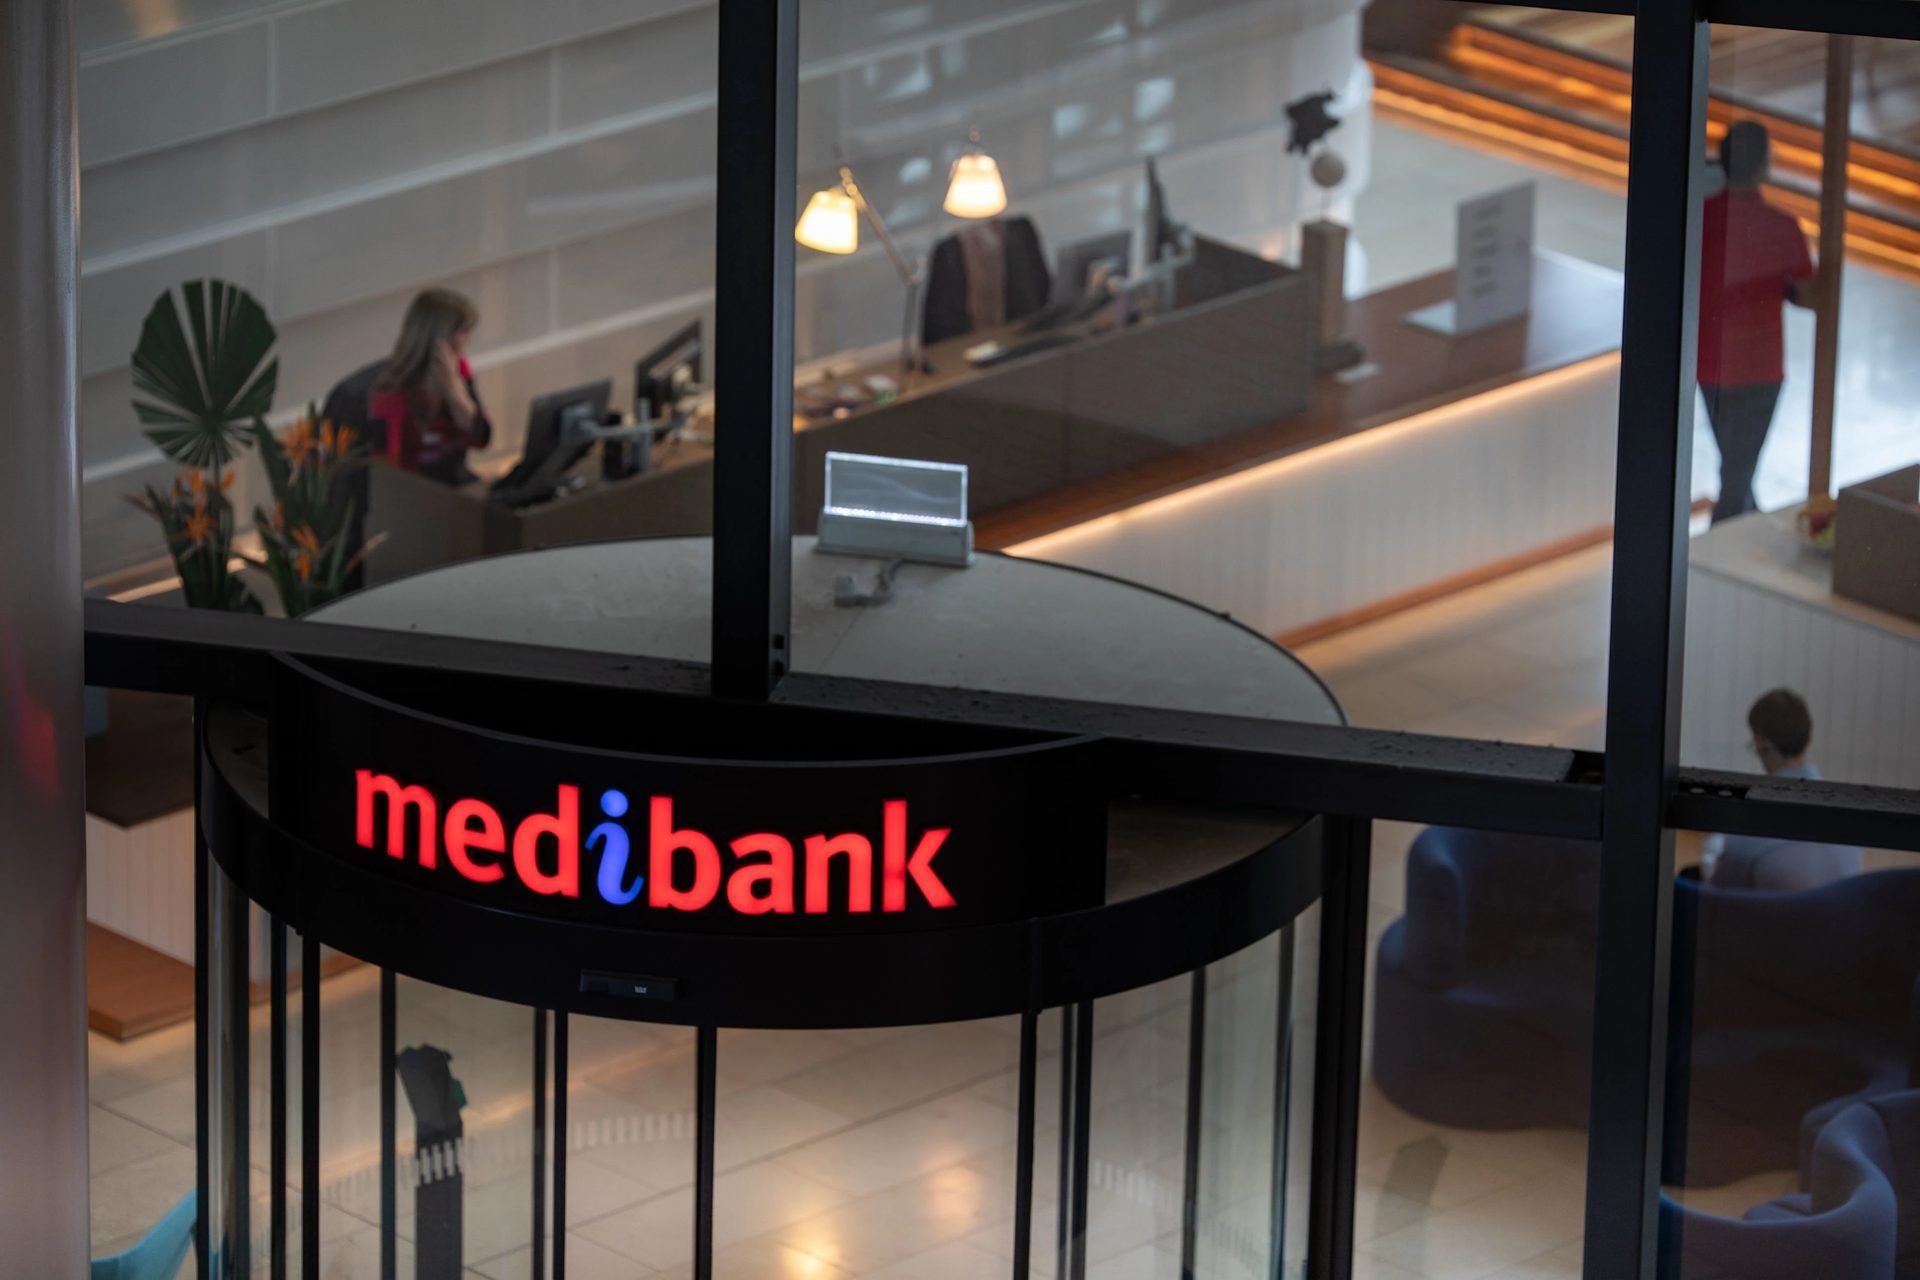 Medibank class action explained: Remember the Medibank data breach, join Medibank data breach class action, and get Medibank compensation of up to $20,000.